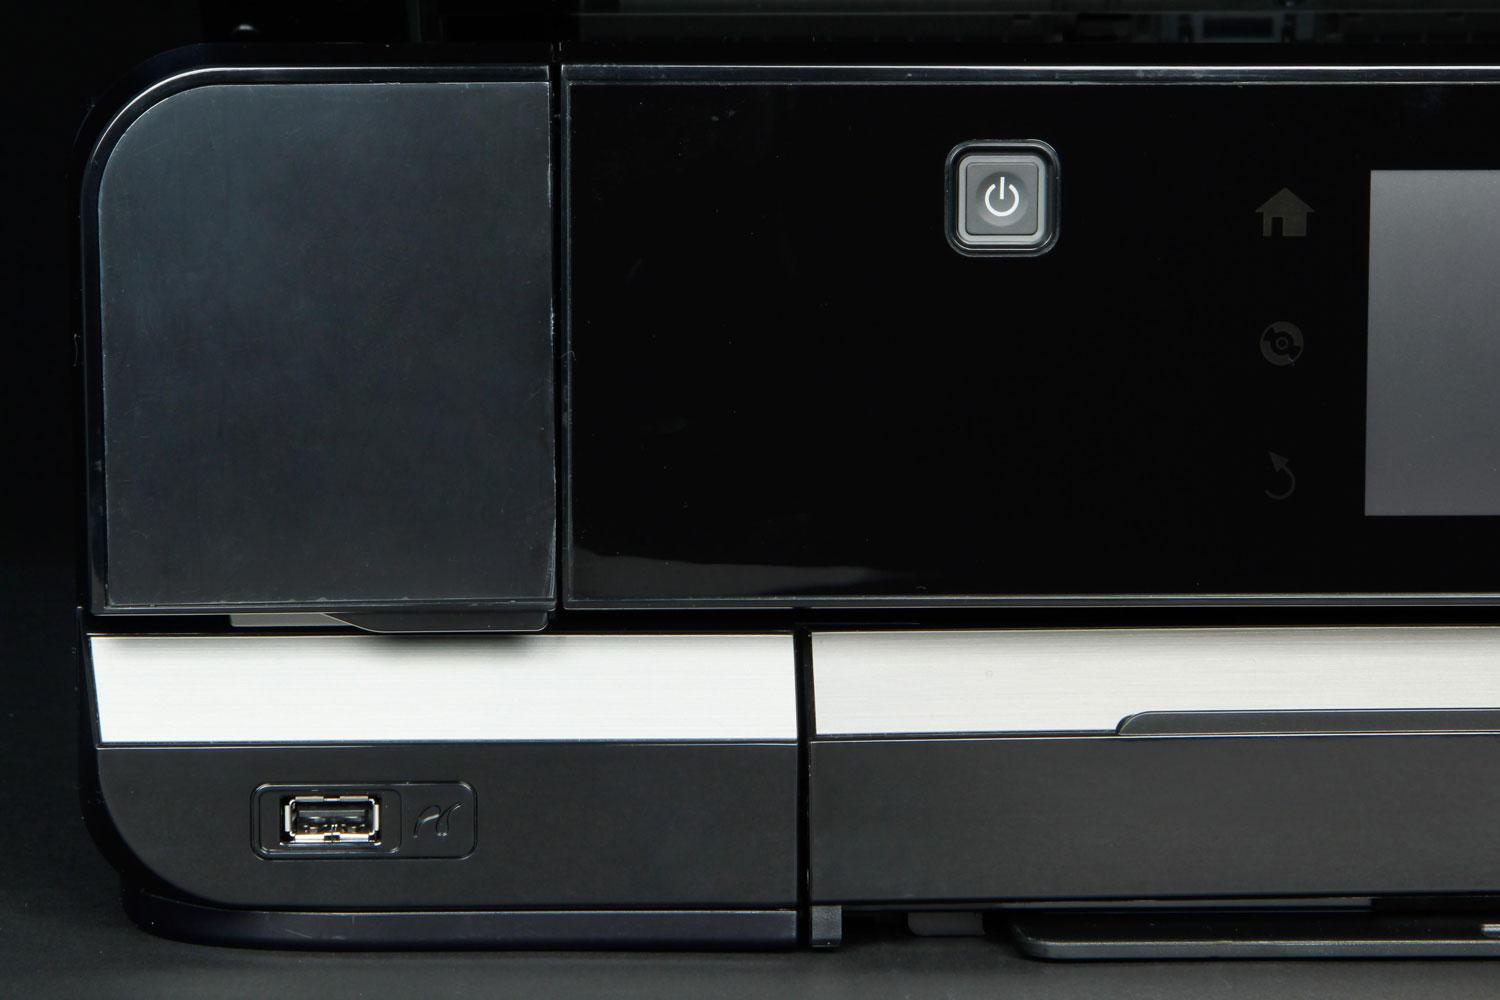 tuberkulose omvendt Arving Epson Expression XP-950 review | Digital Trends